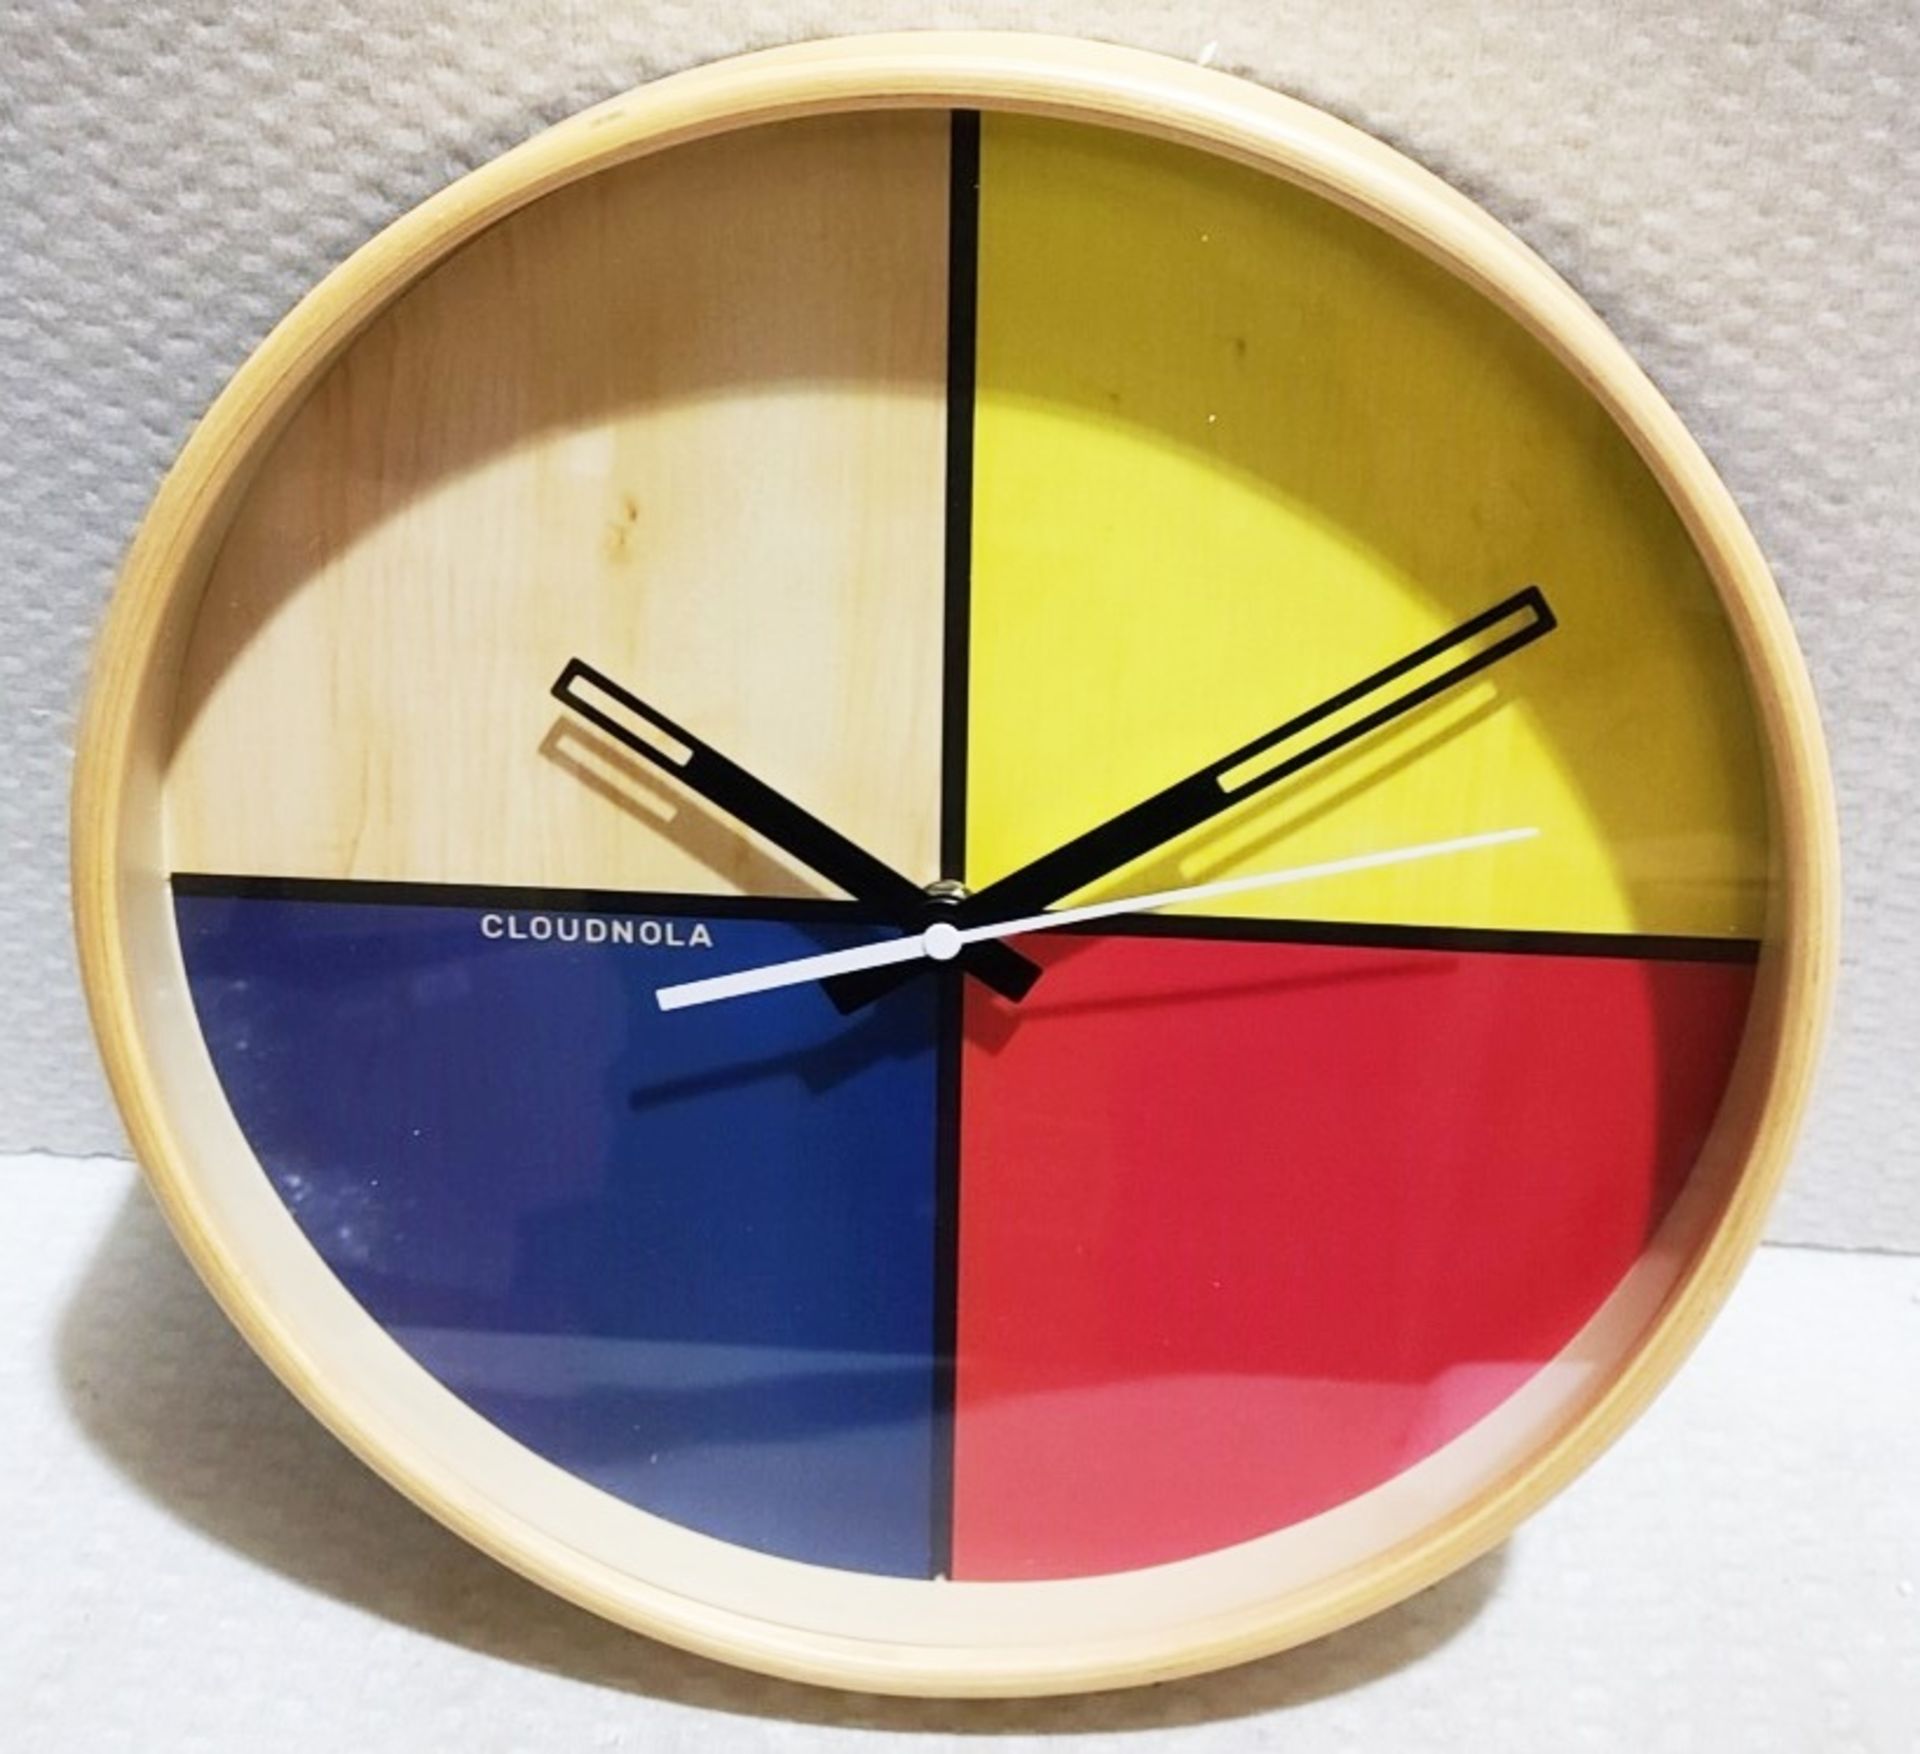 1 x CLOUDNOLA Contemporary Flur Yellow, Red, Blue & Birch Wall Clock With Offset Wooden Rim 30cm - Image 4 of 8